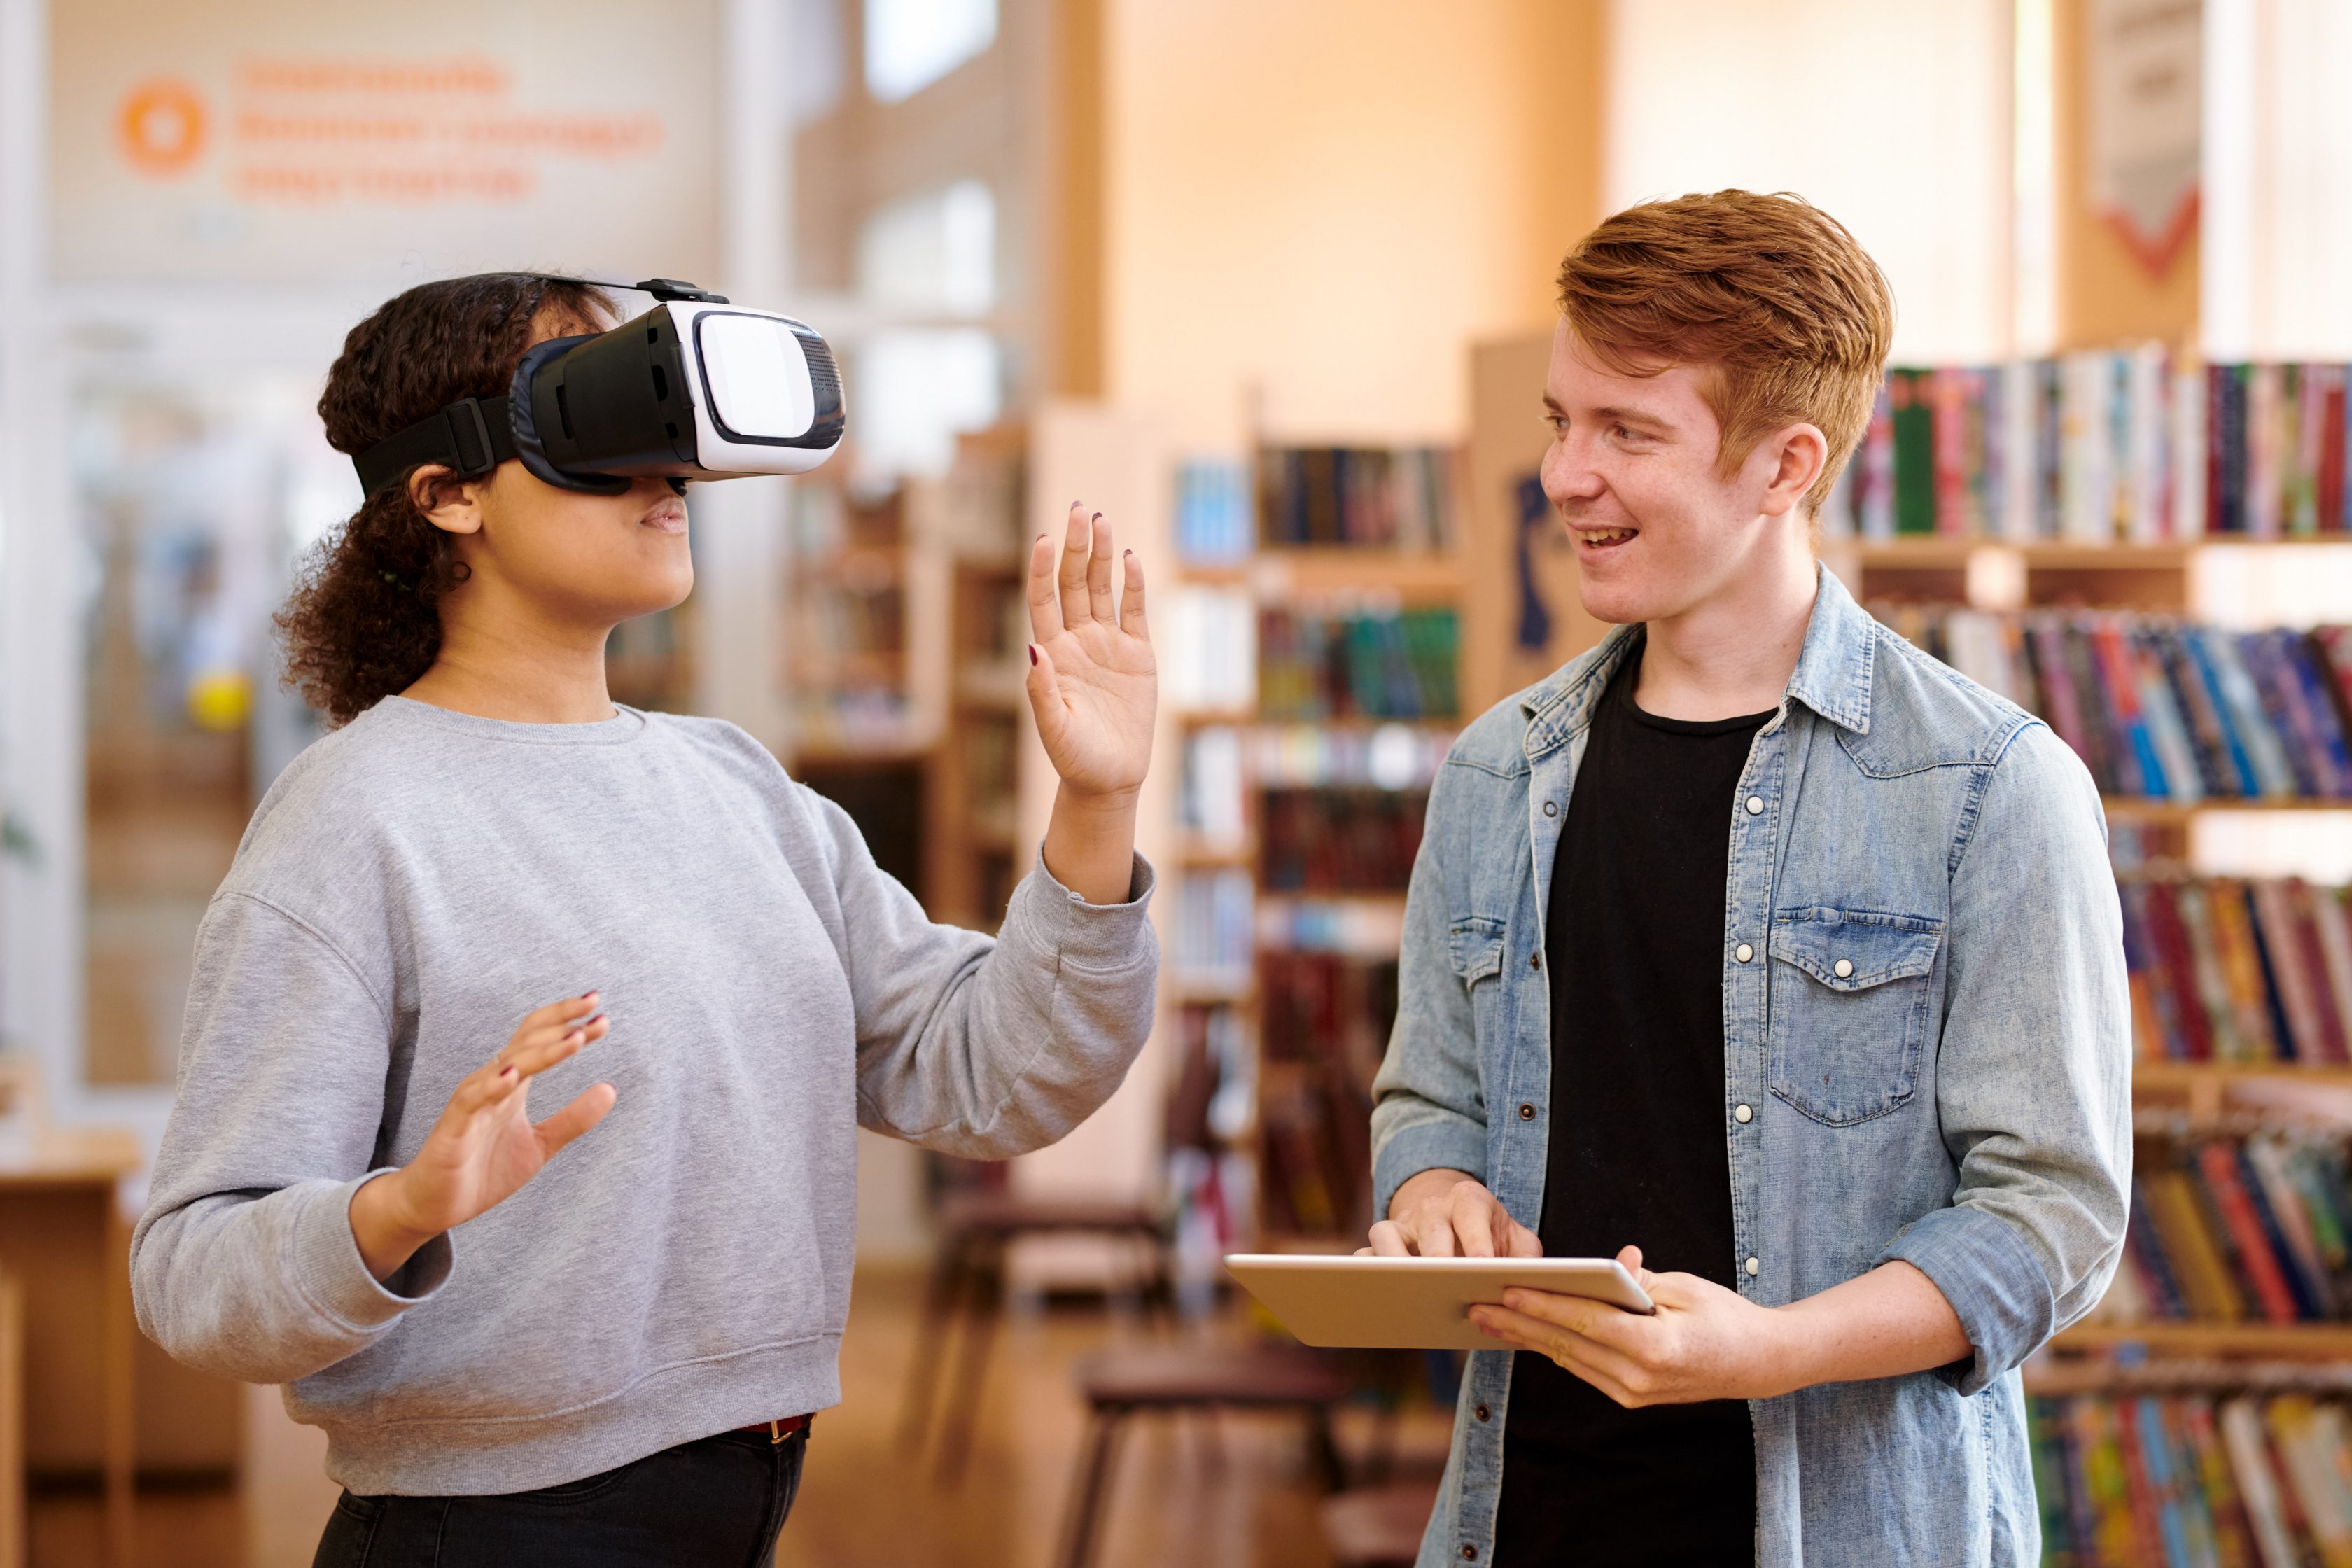 students with tablet are interacting with vr headset